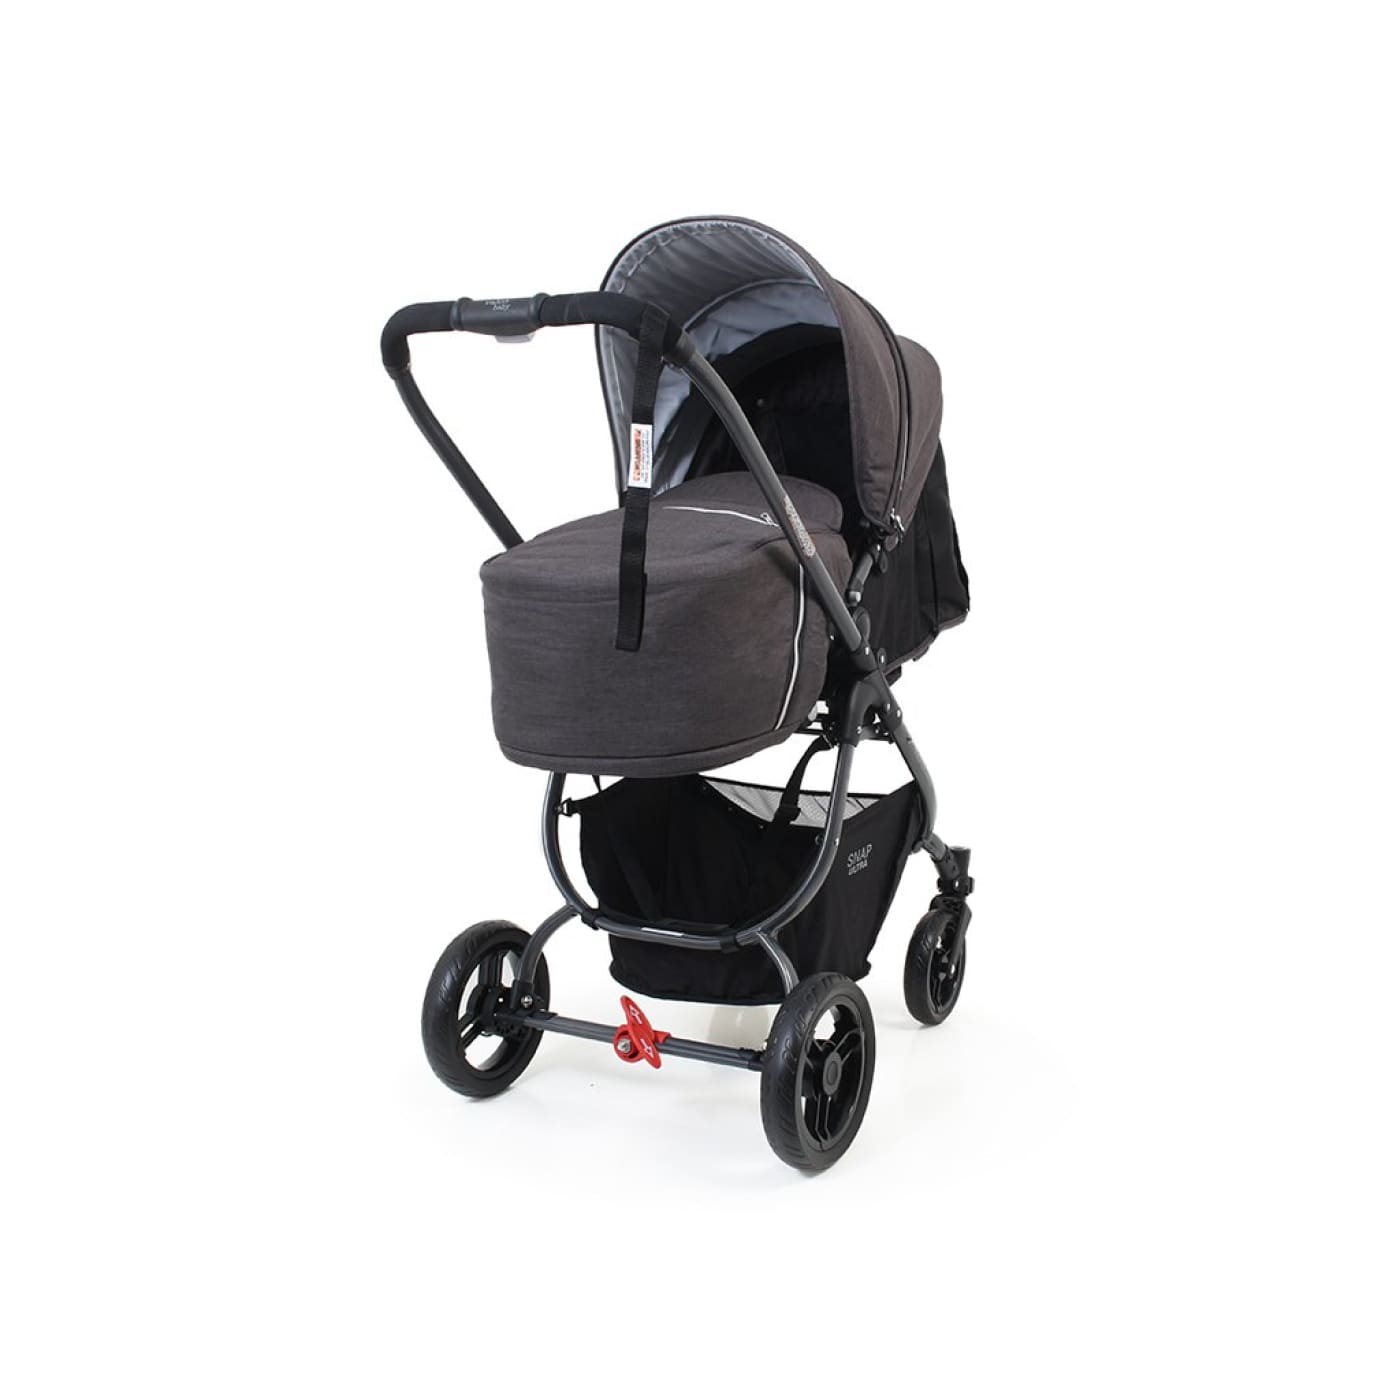 Valco Baby Snap Ultra Tailormade - Charcoal - PRAMS & STROLLERS - 4 WHEEL TSC